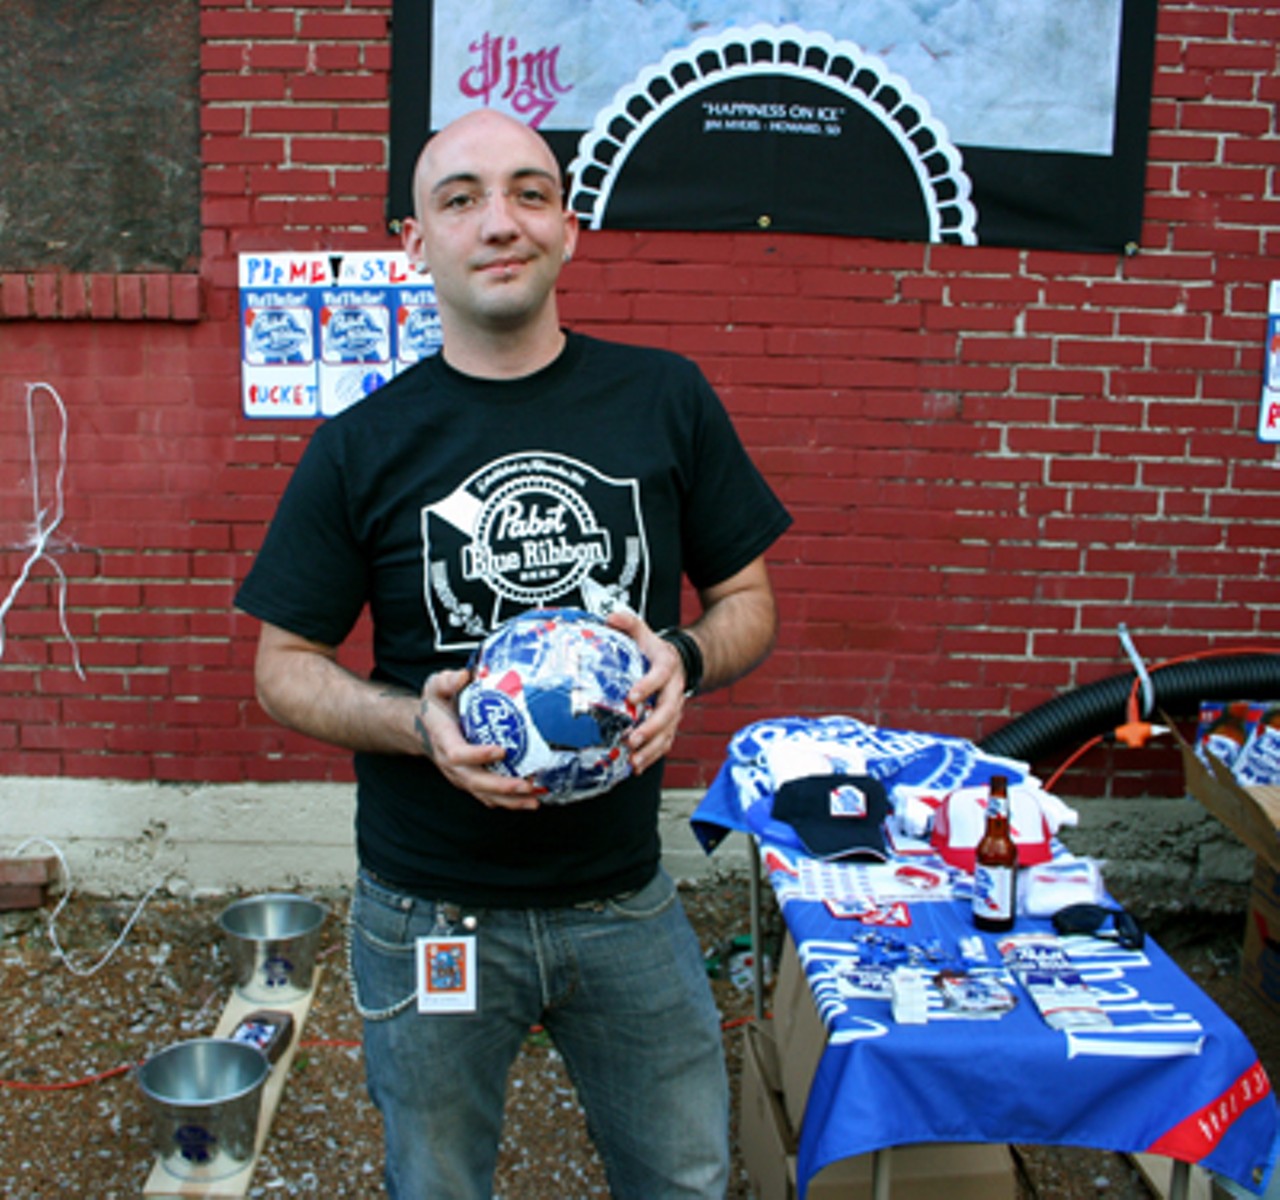 PBR provided free games, including a ball toss, and gave away some sweet merch as prizes.